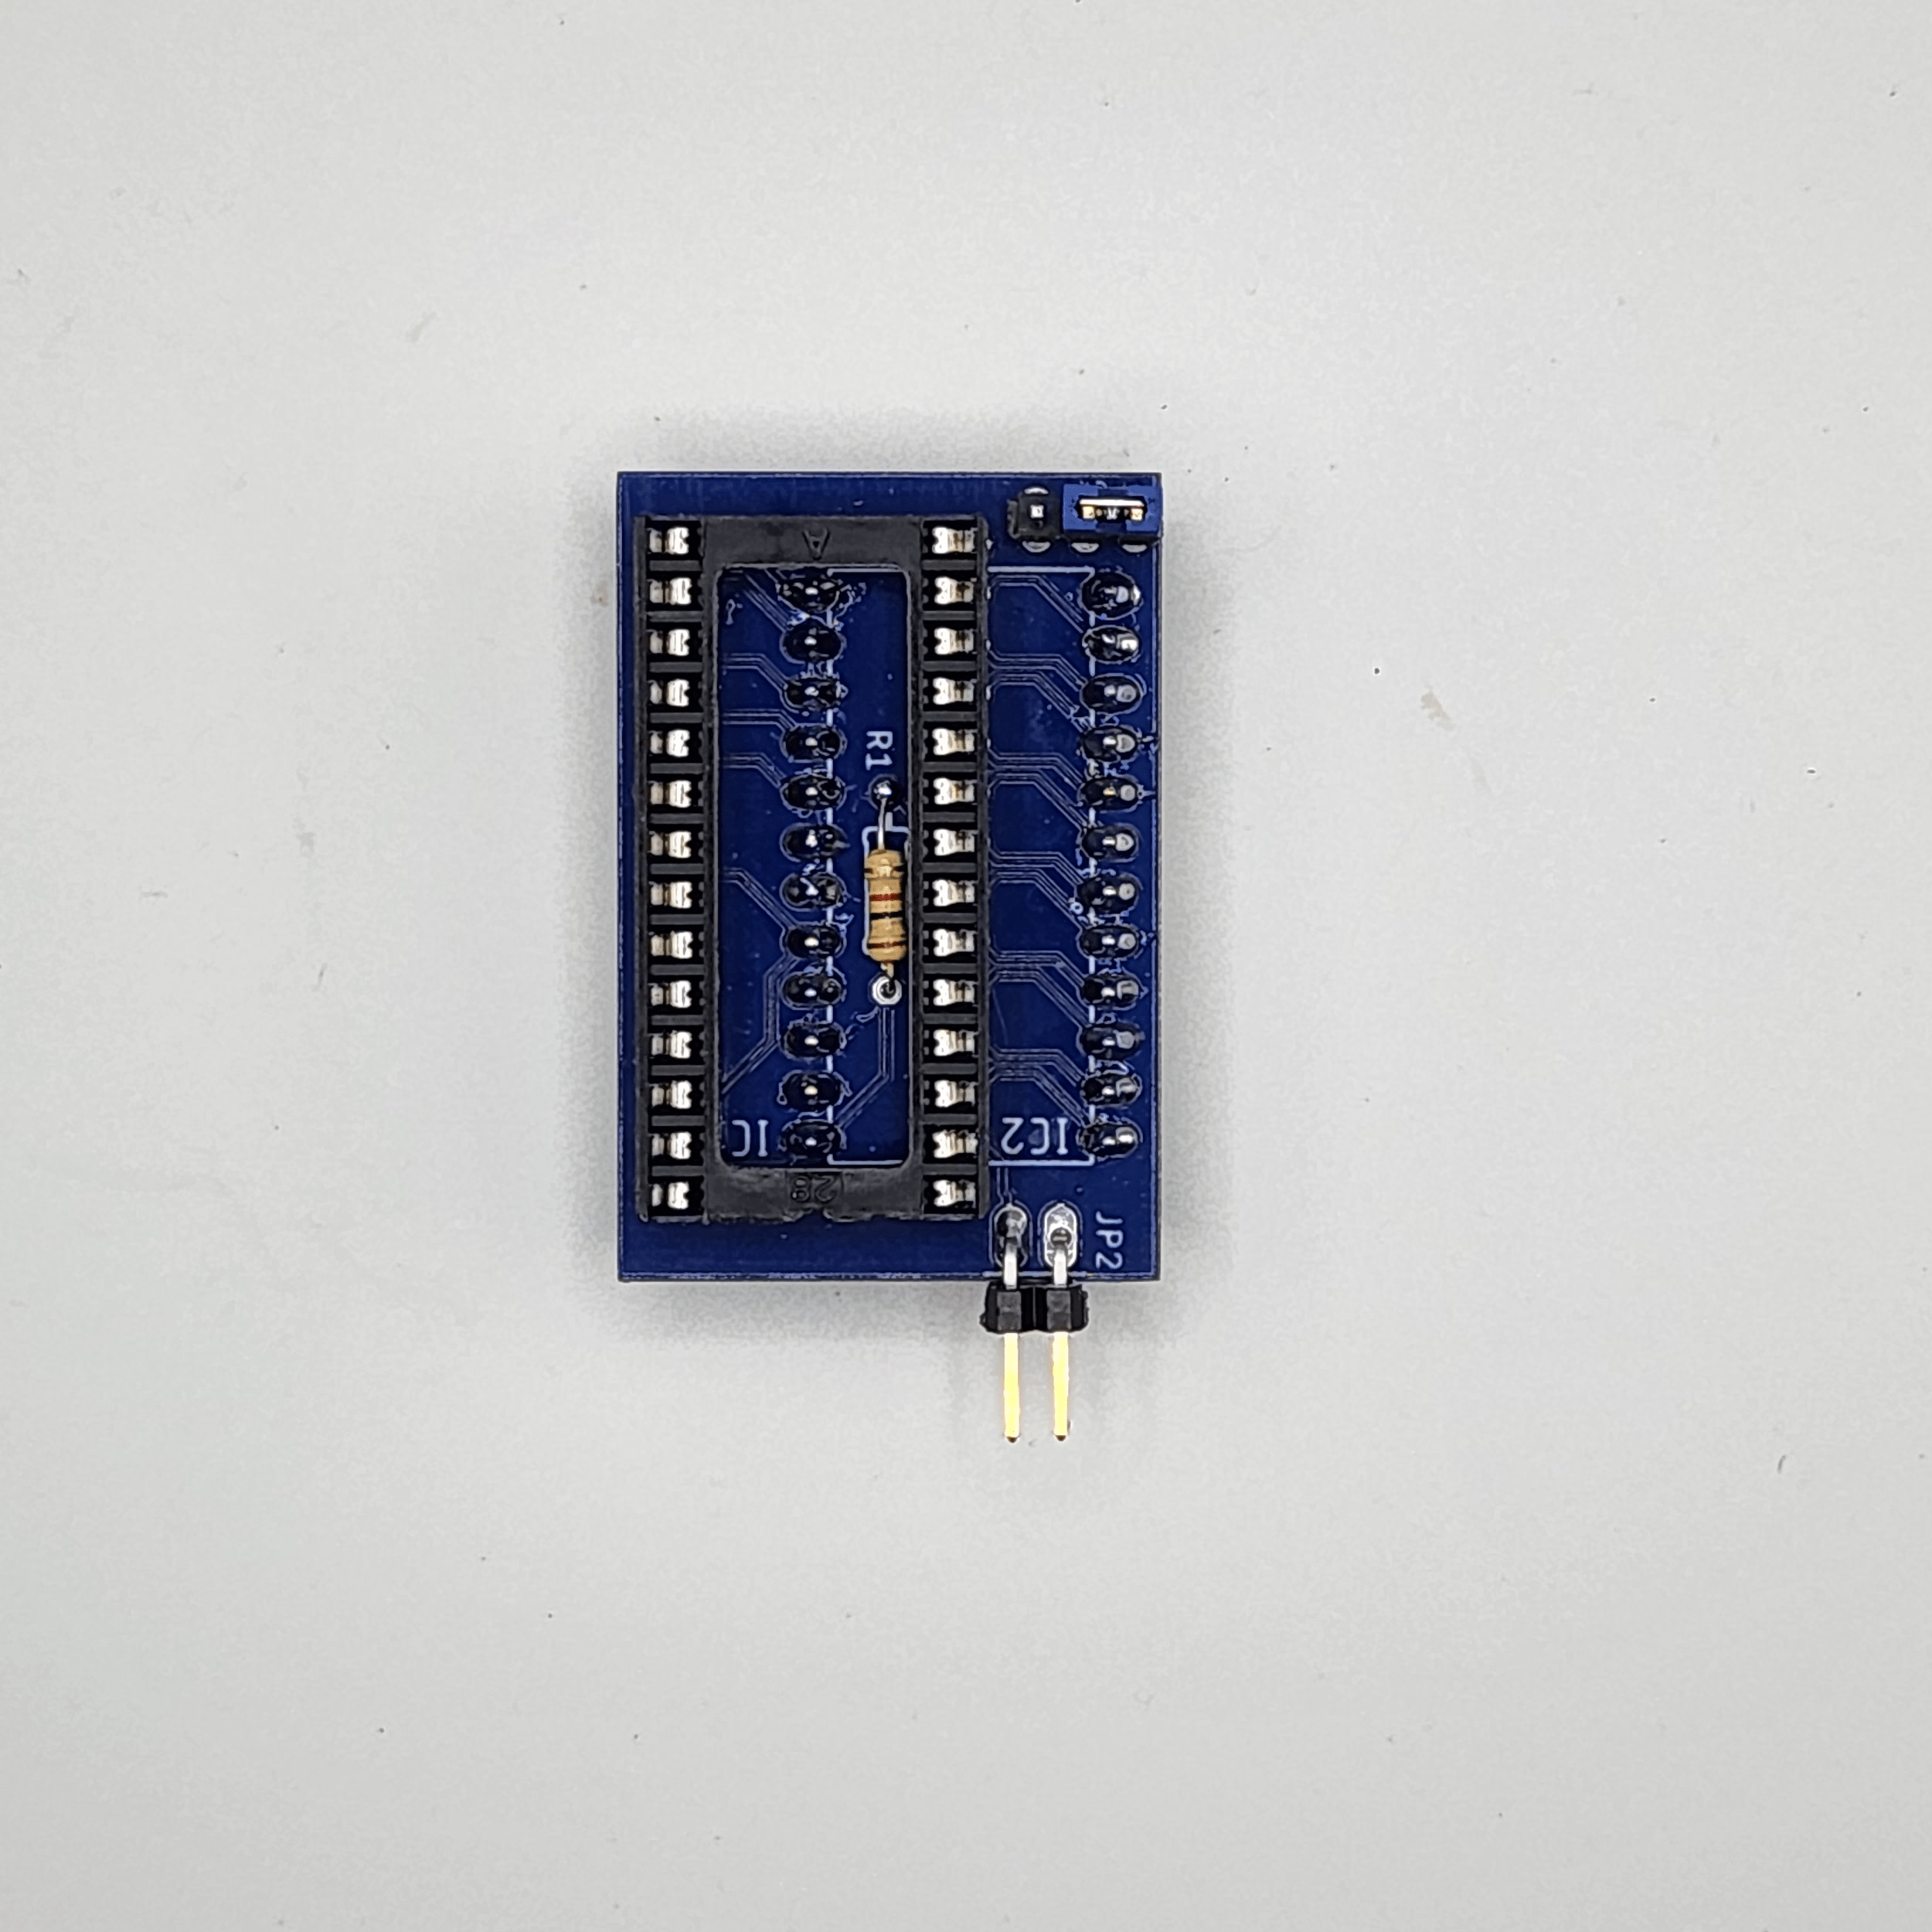 Top of 2532 to 2764 EPROM Adapter